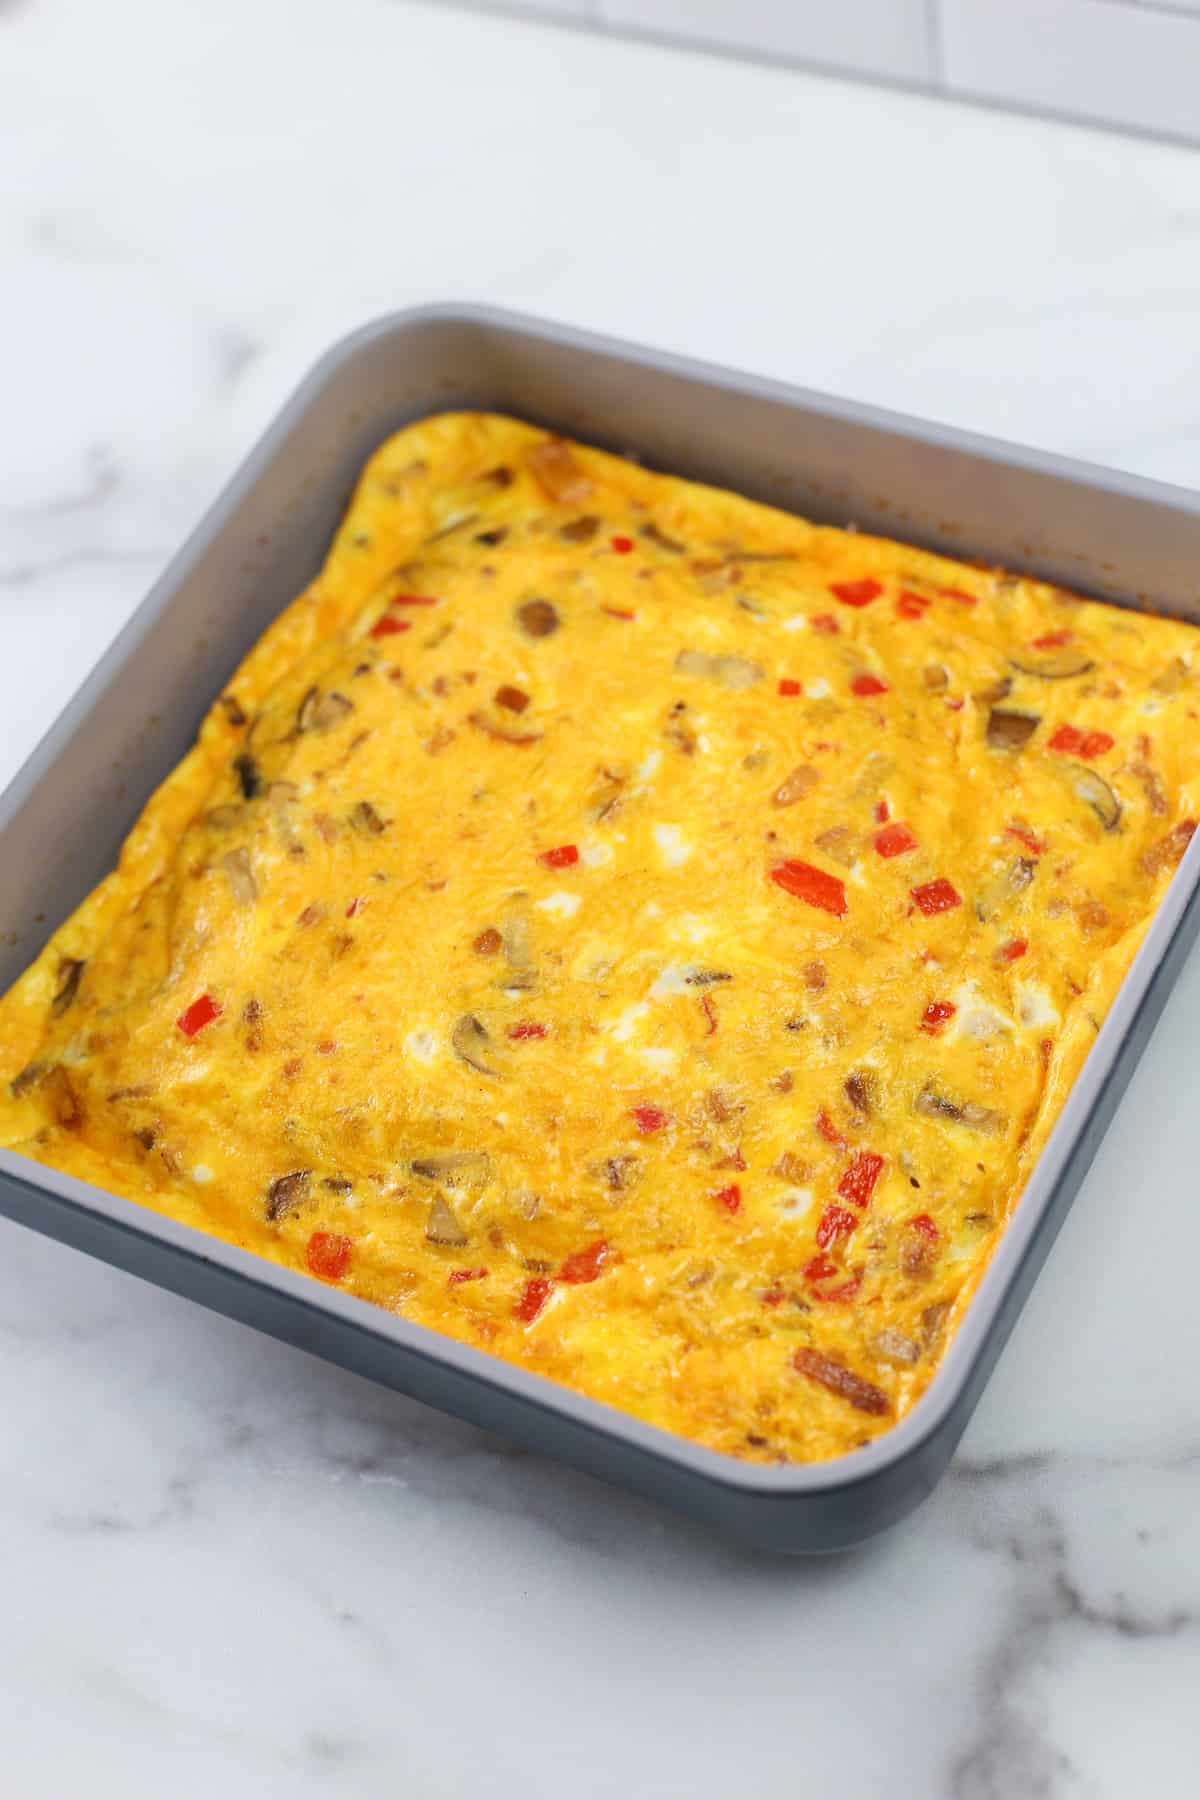 Baked omelette in baking pan cooling on the countertop.